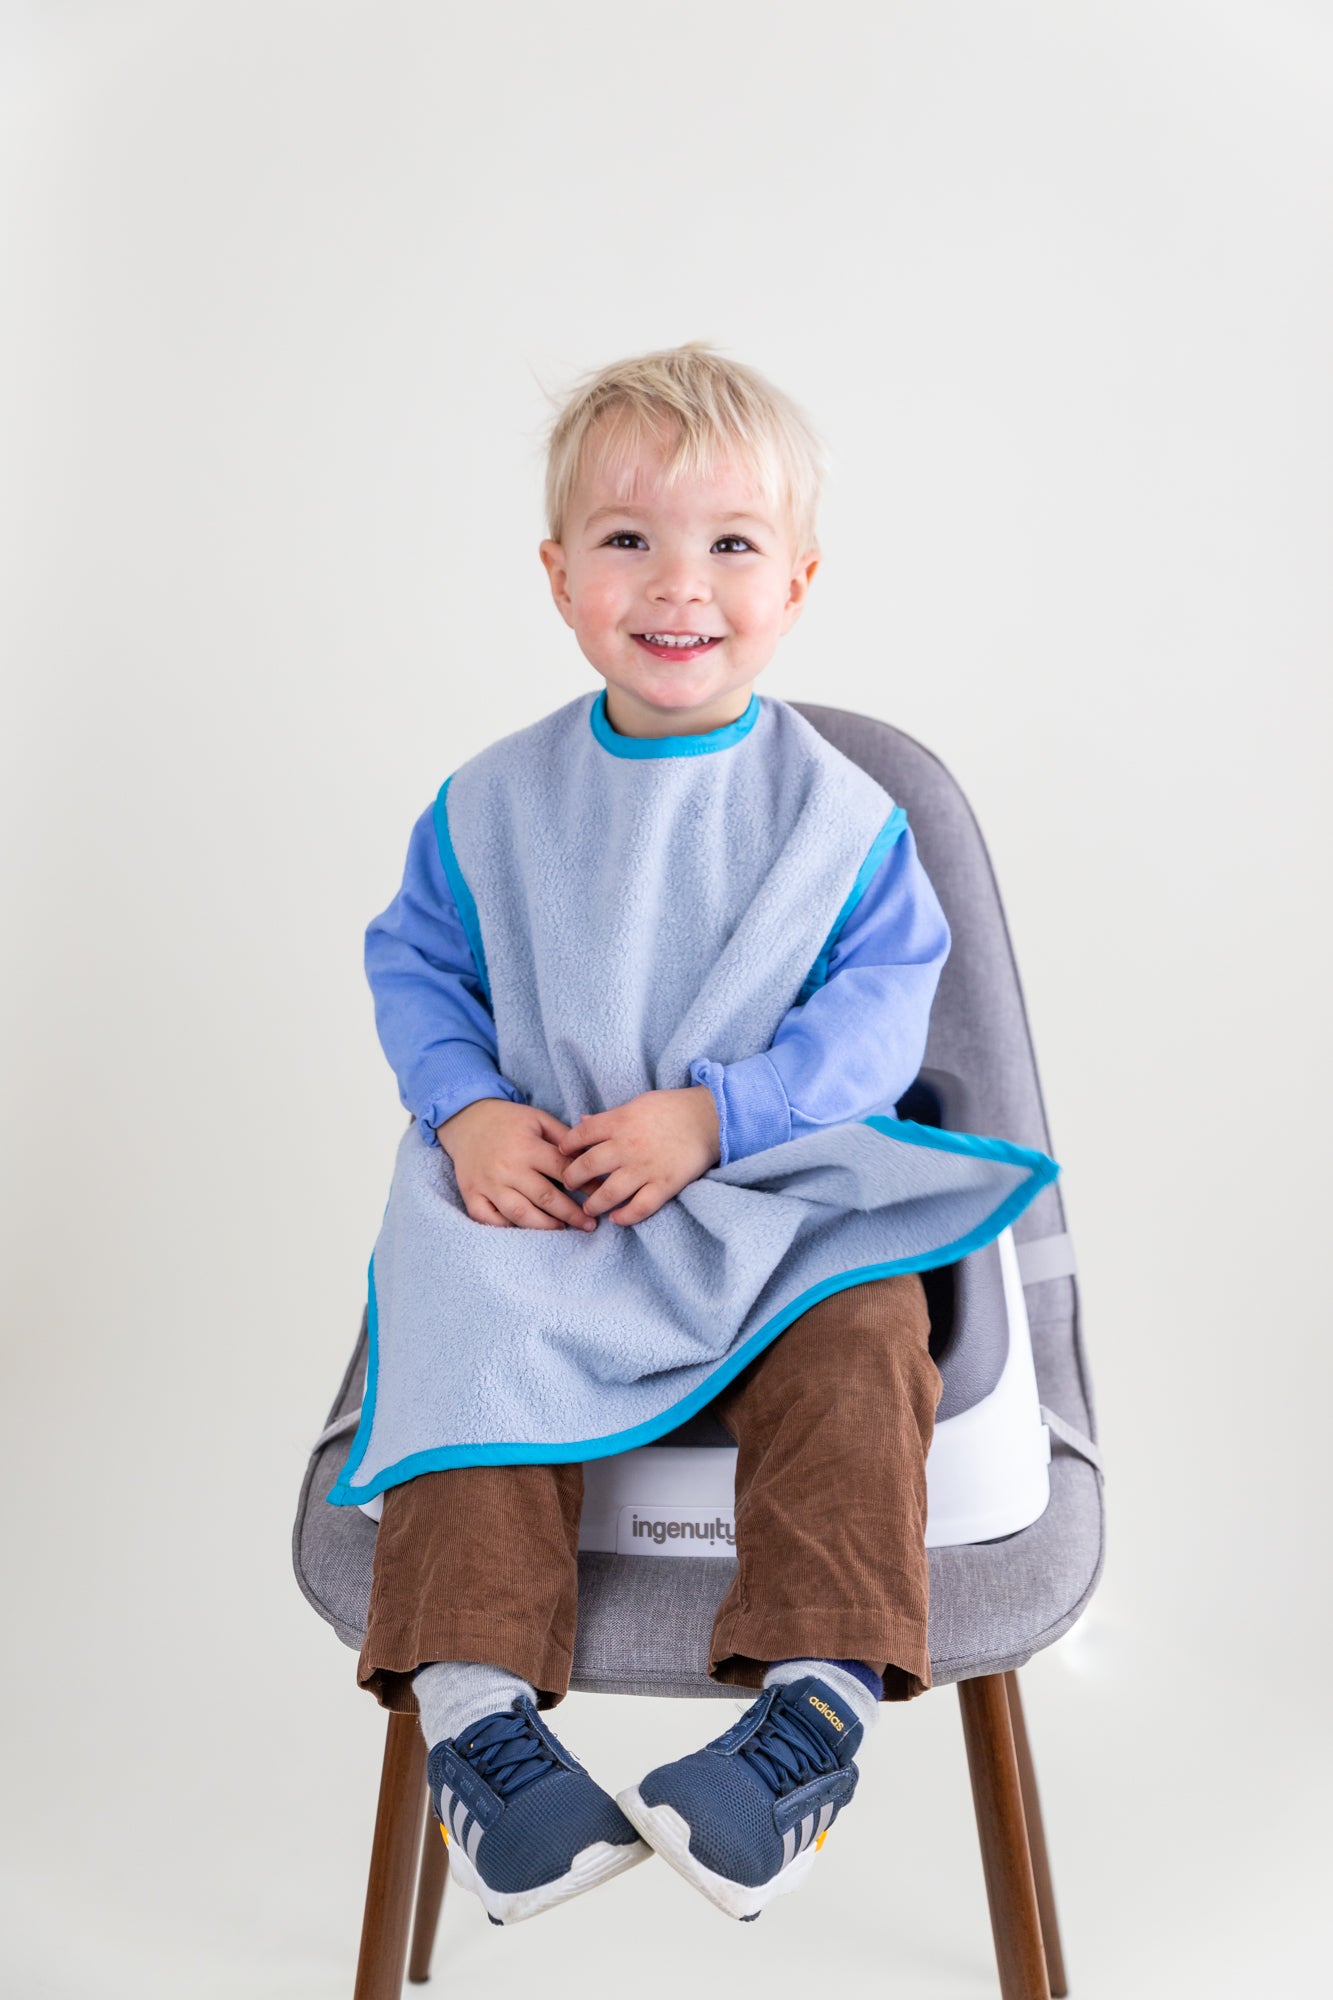 Car Seat Bib combines ultra absorbent fabric and waterproof backing to protect babies, toddlers, kids from motion sickness and spills in the car, stroller, and meals.